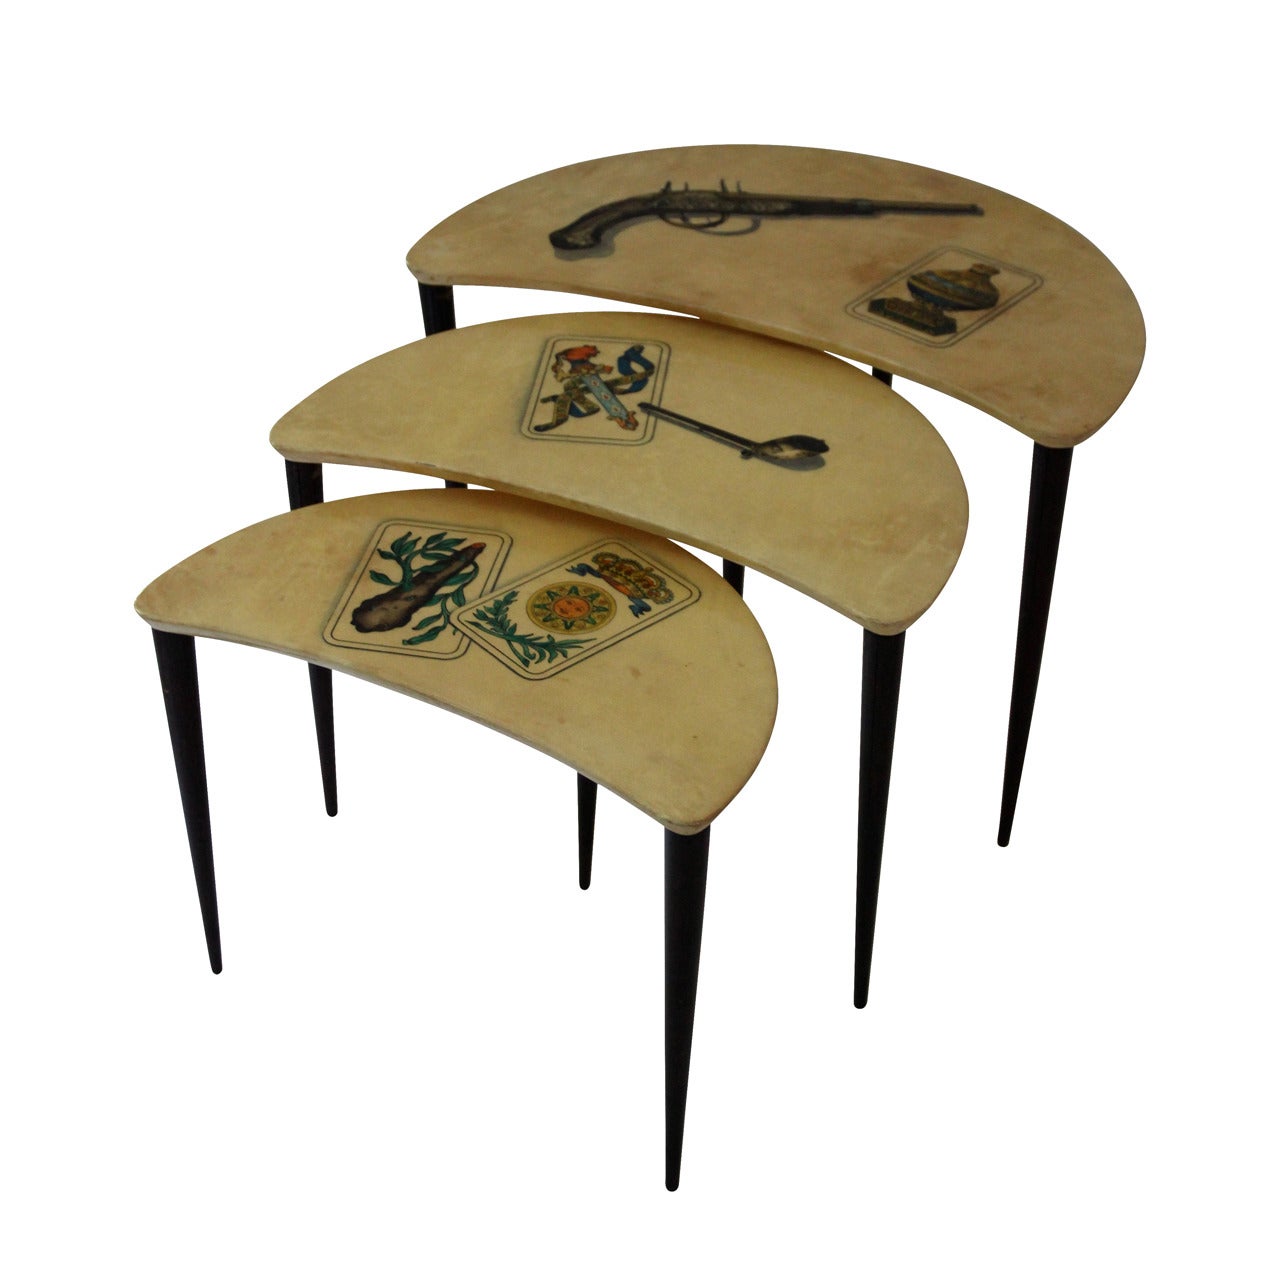 Aldo Tura, Set of Three Gigogne Tables Covered in Varnished Parchment